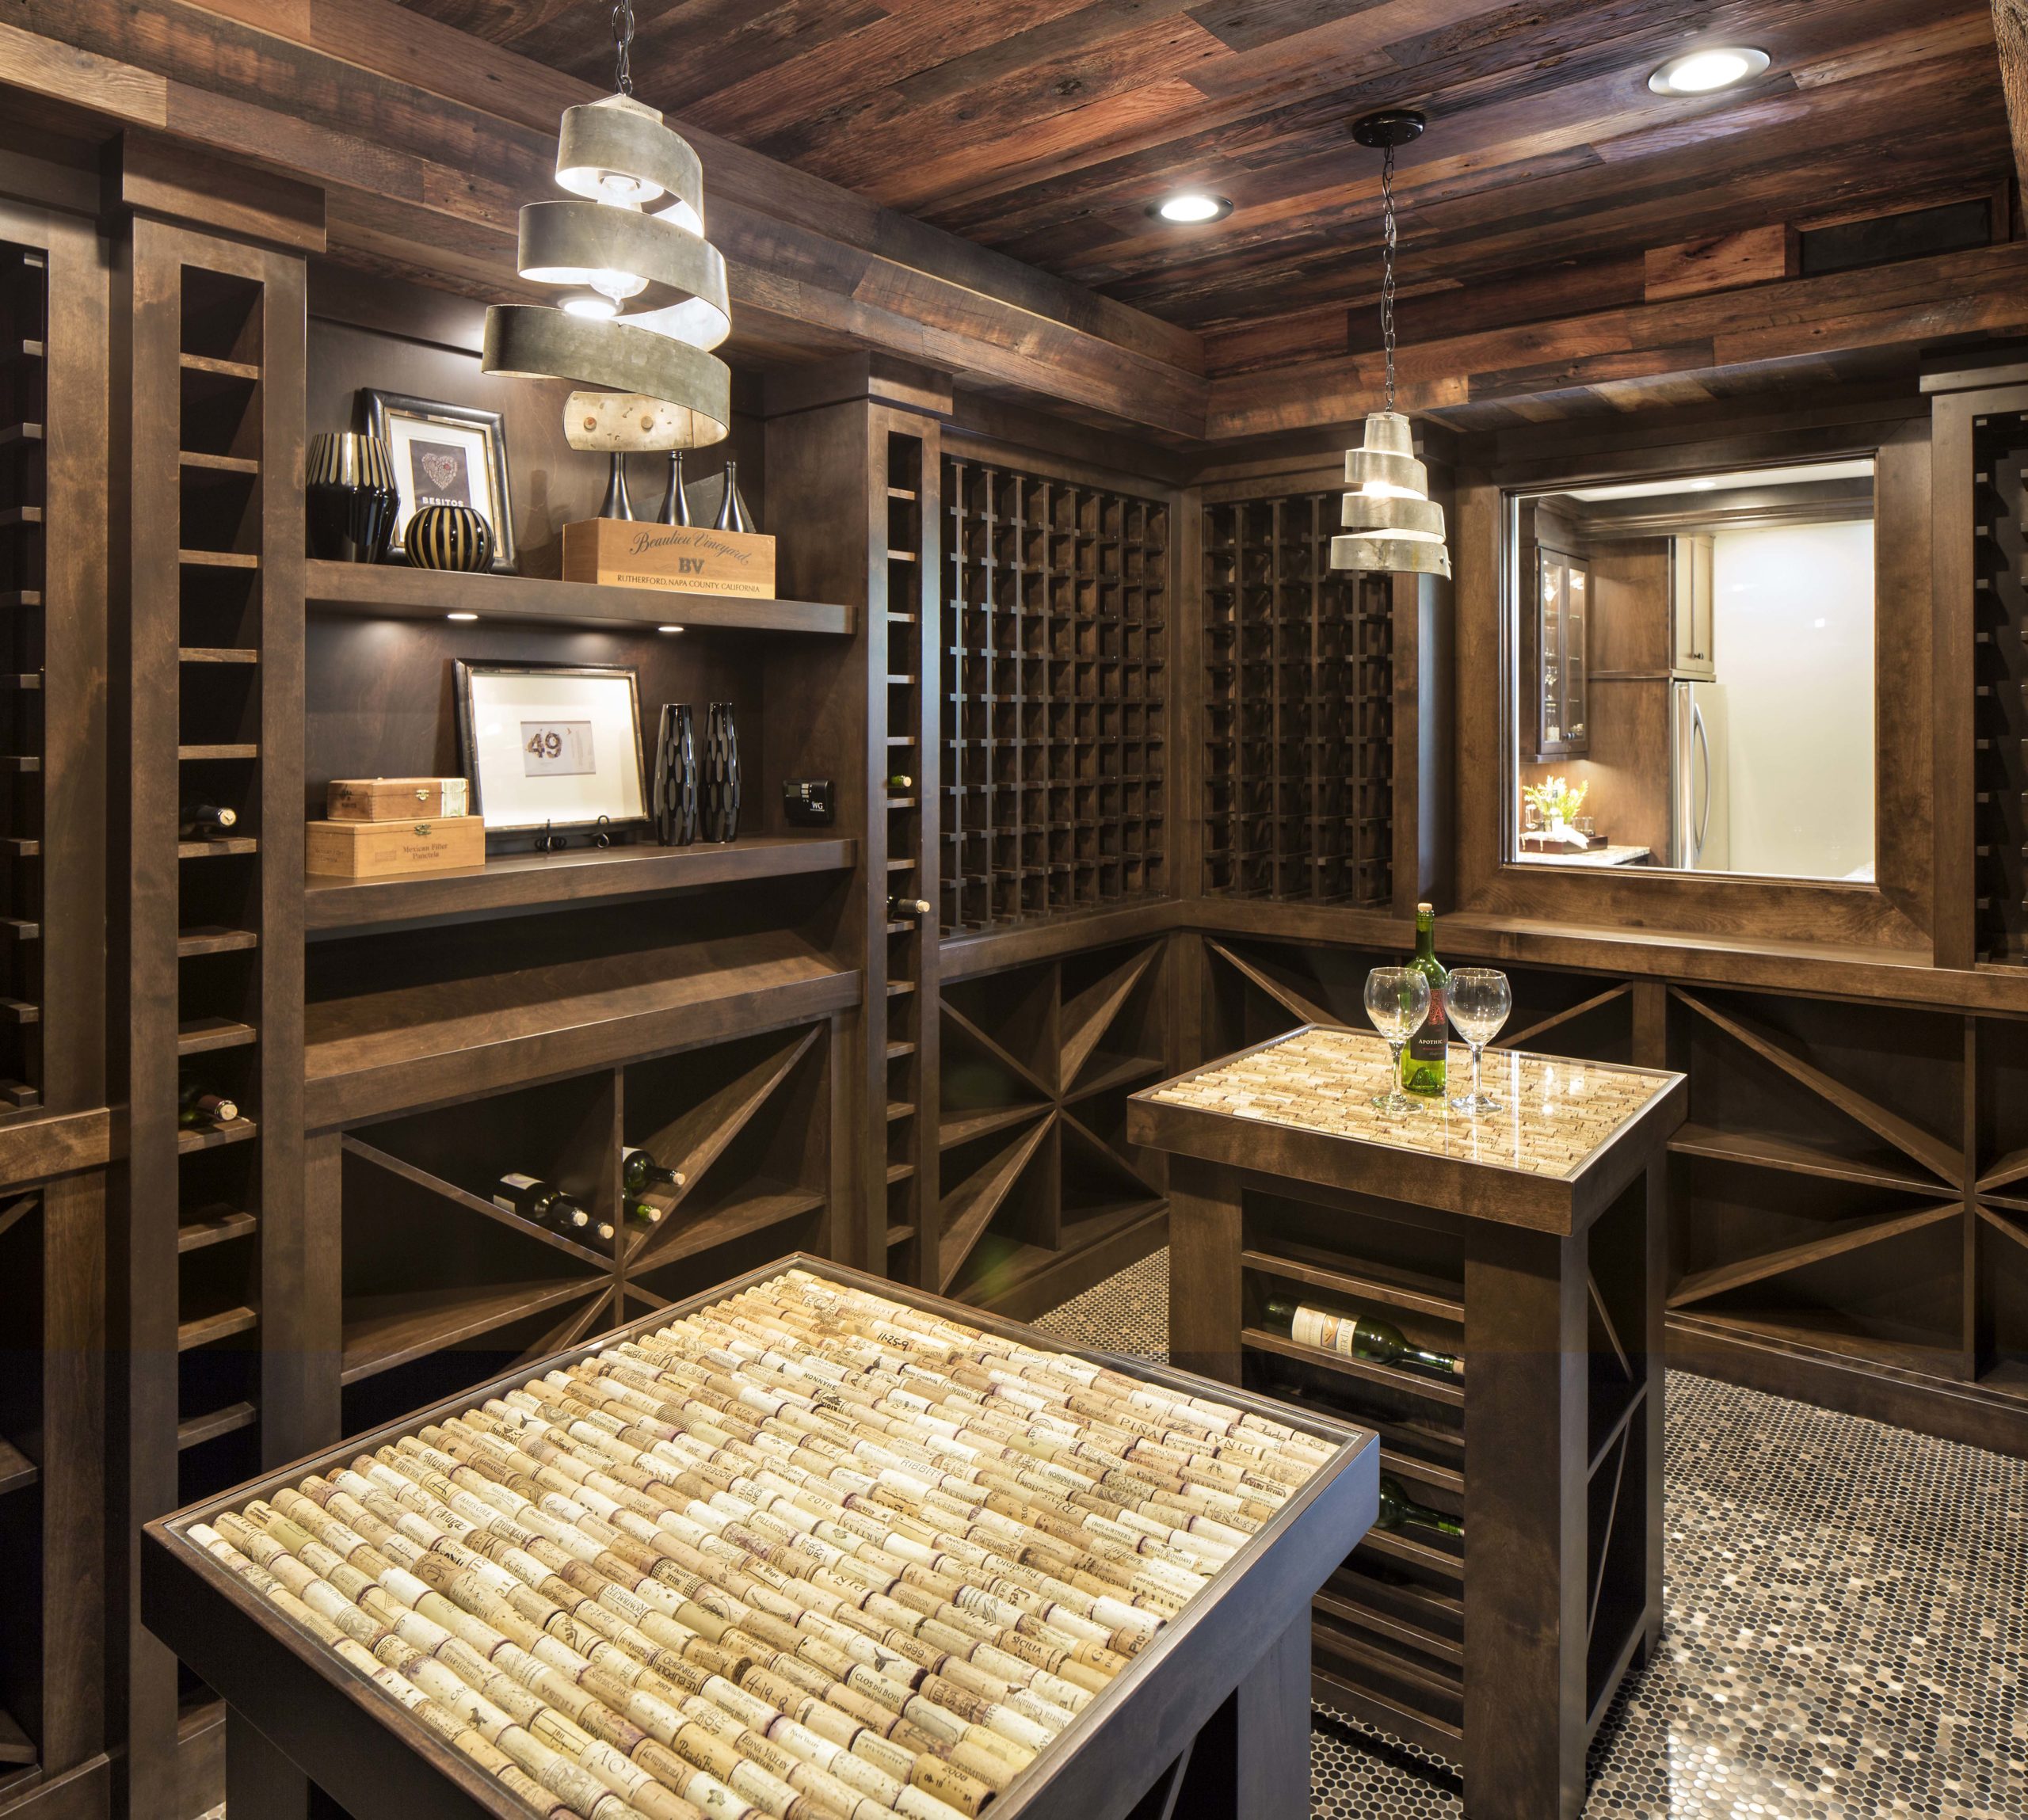 An Edina remodel featuring a wine cellar with elegant wooden shelves and a functional table.